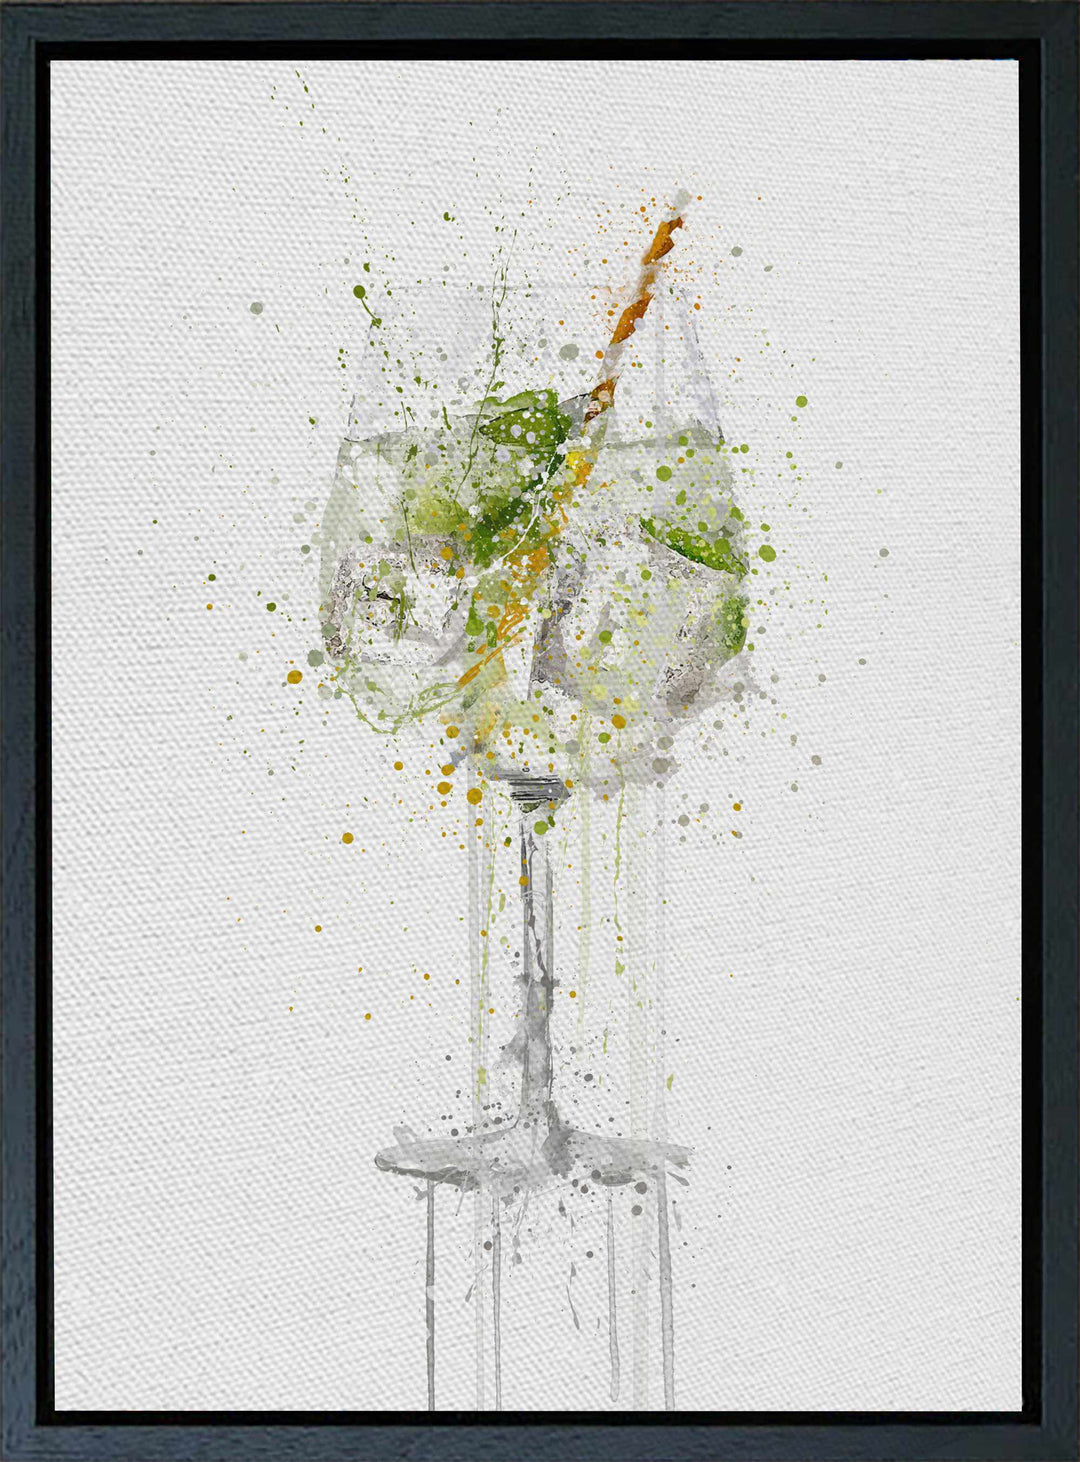 Premium Canvas Wall Art Print Gin and Tonic Goblet Glass-We Love Prints